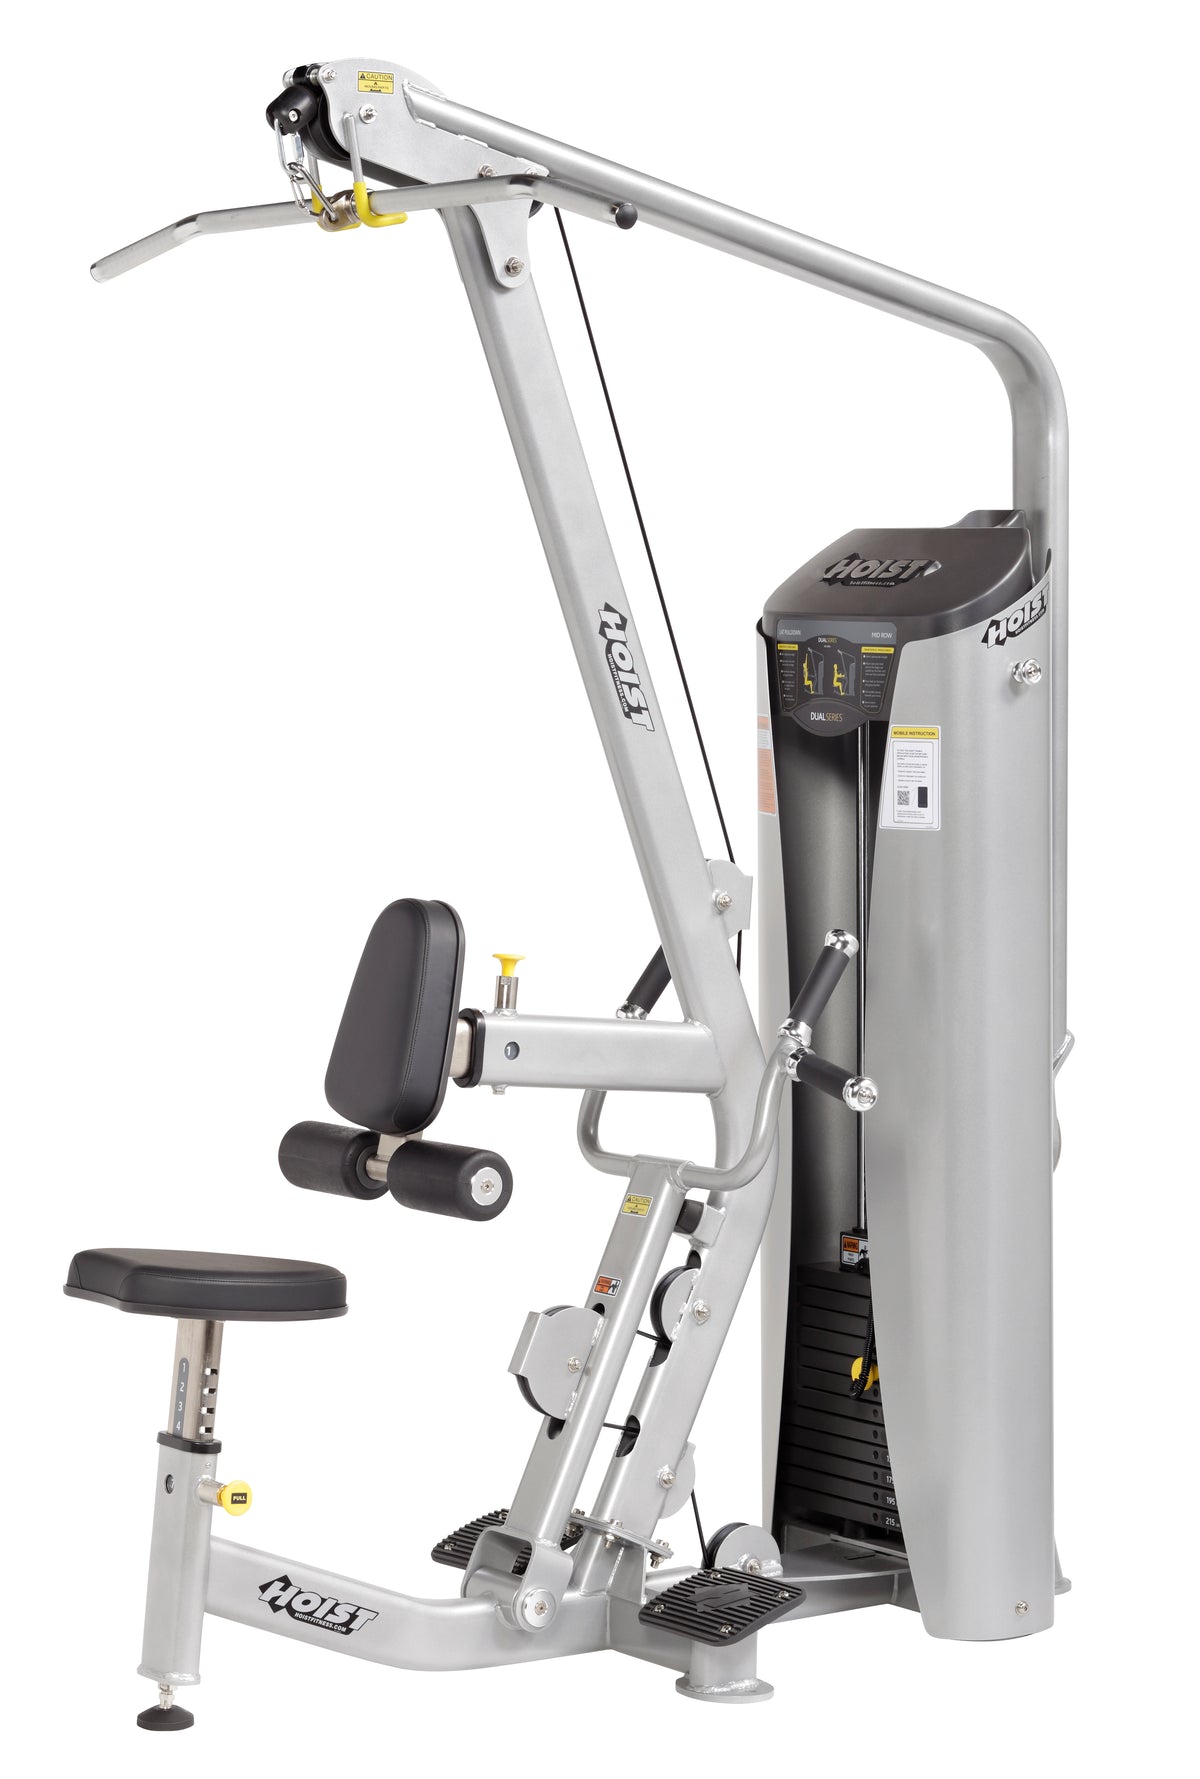 Hoist Fitness HDG-3200 Lat Pulldown/Mid Row full view | Fitness Experience